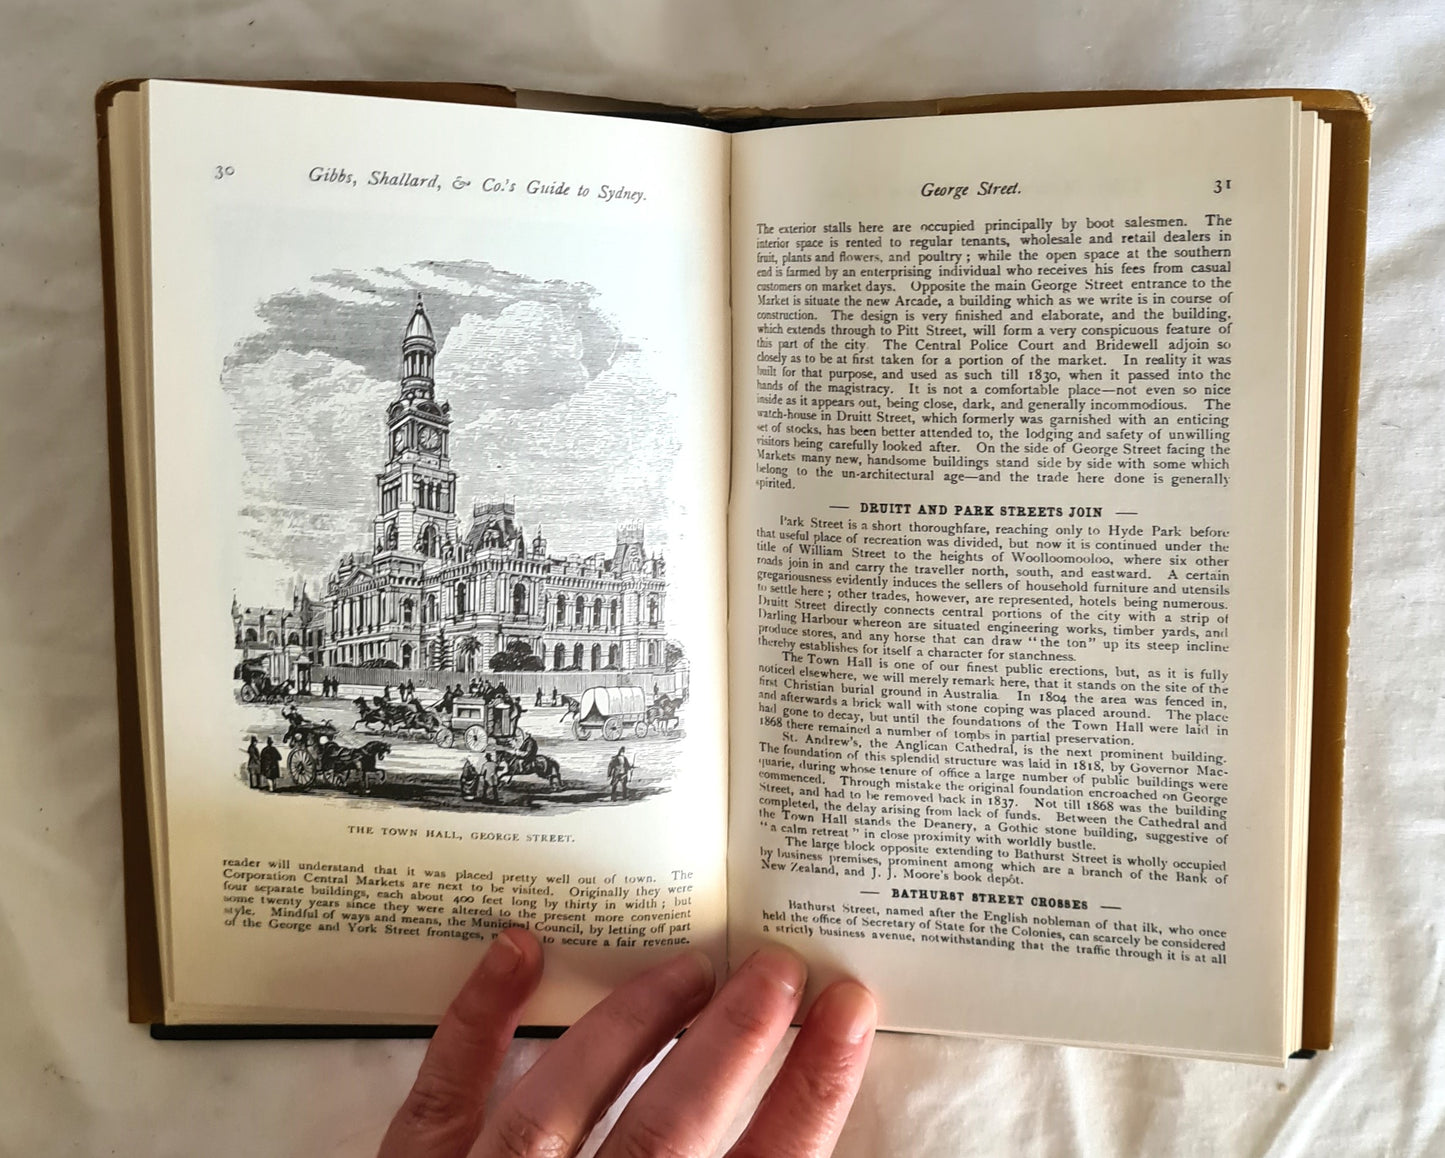 An Illustrated Guide to Sydney and its Suburbs 1882 by Gibbs, Shallard & Co.